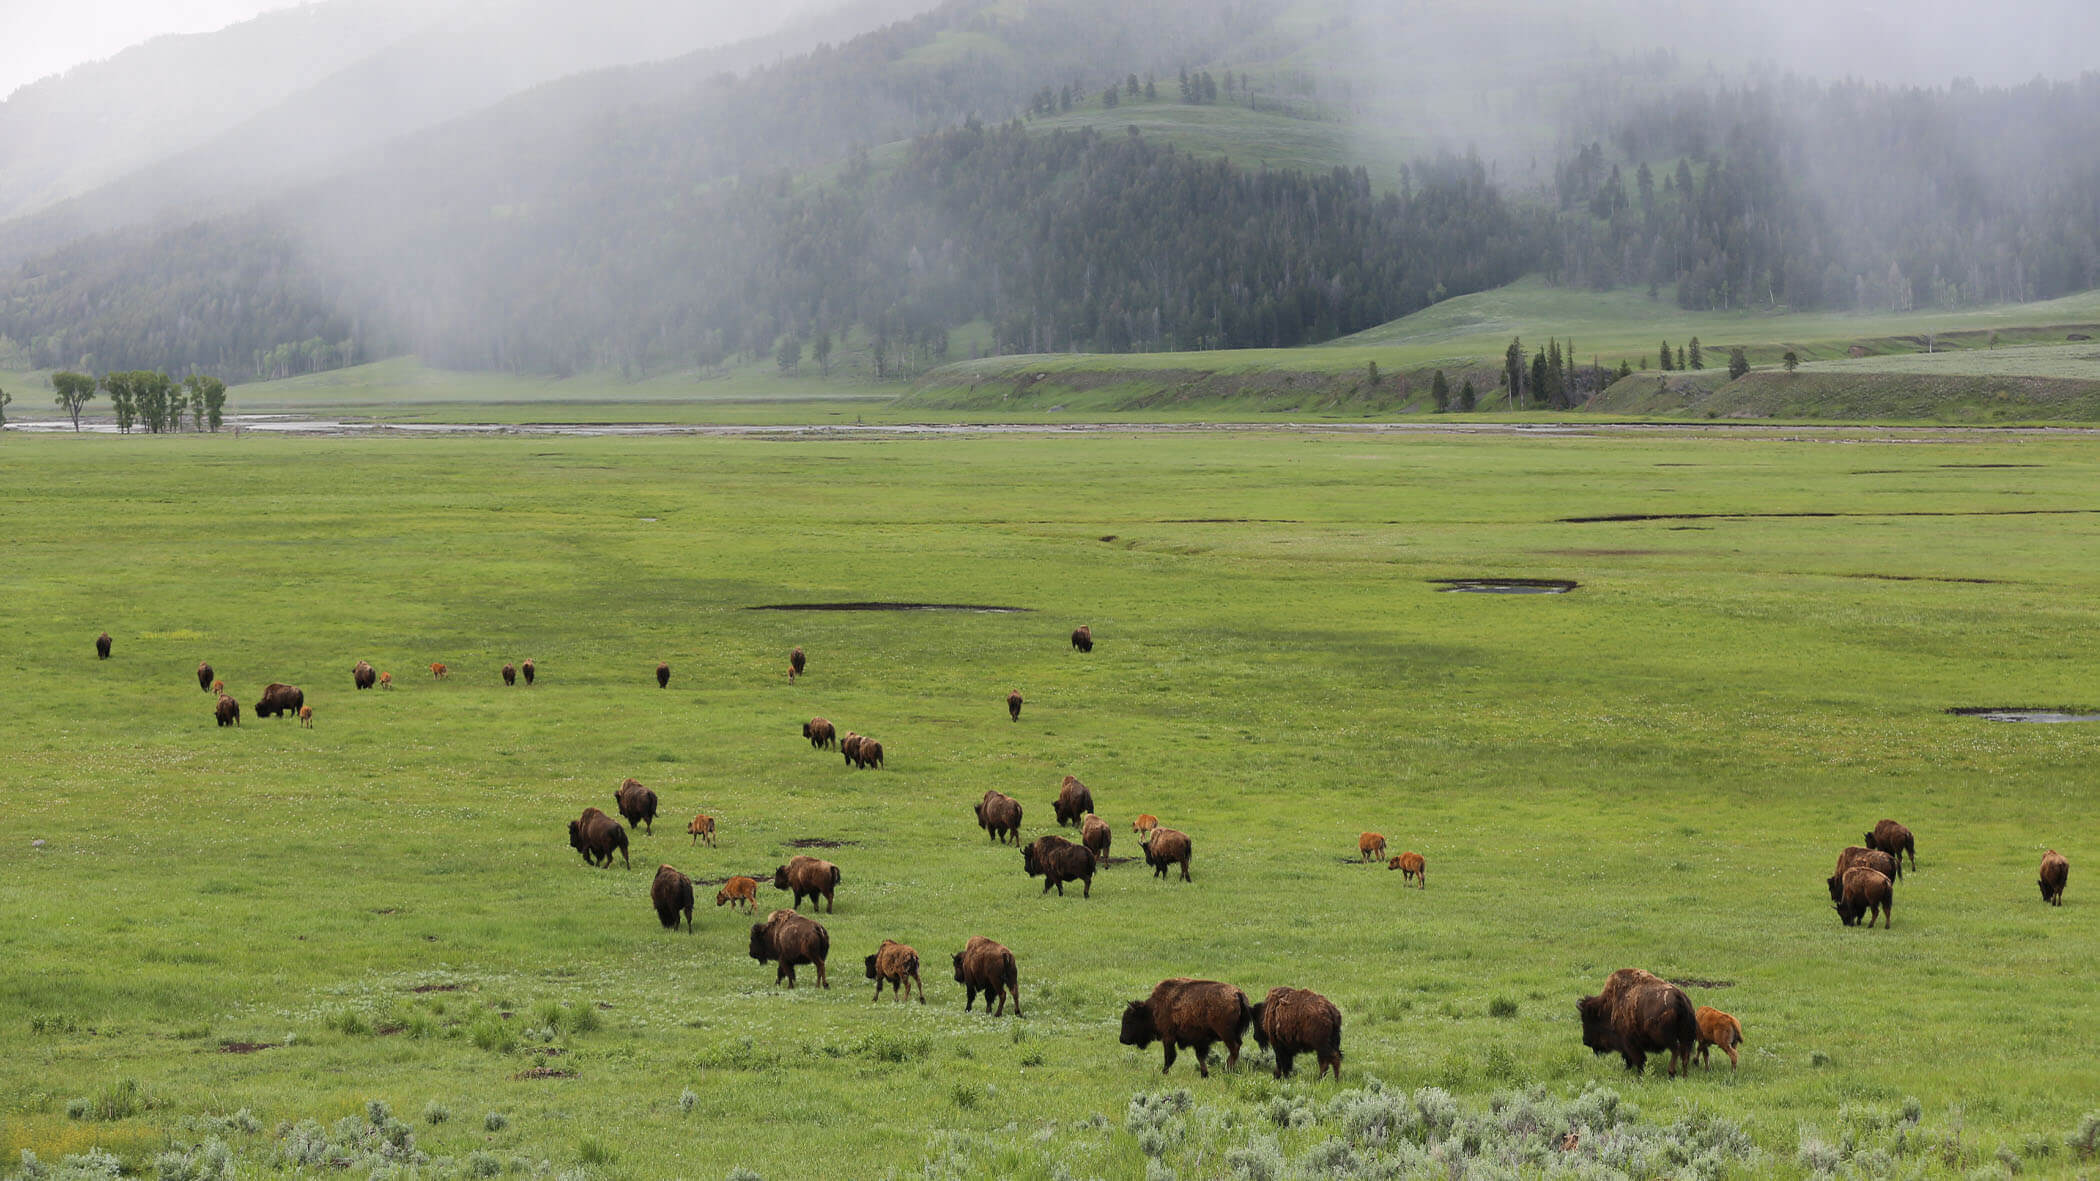 A herd of bison walking across Yellowstone National Park.